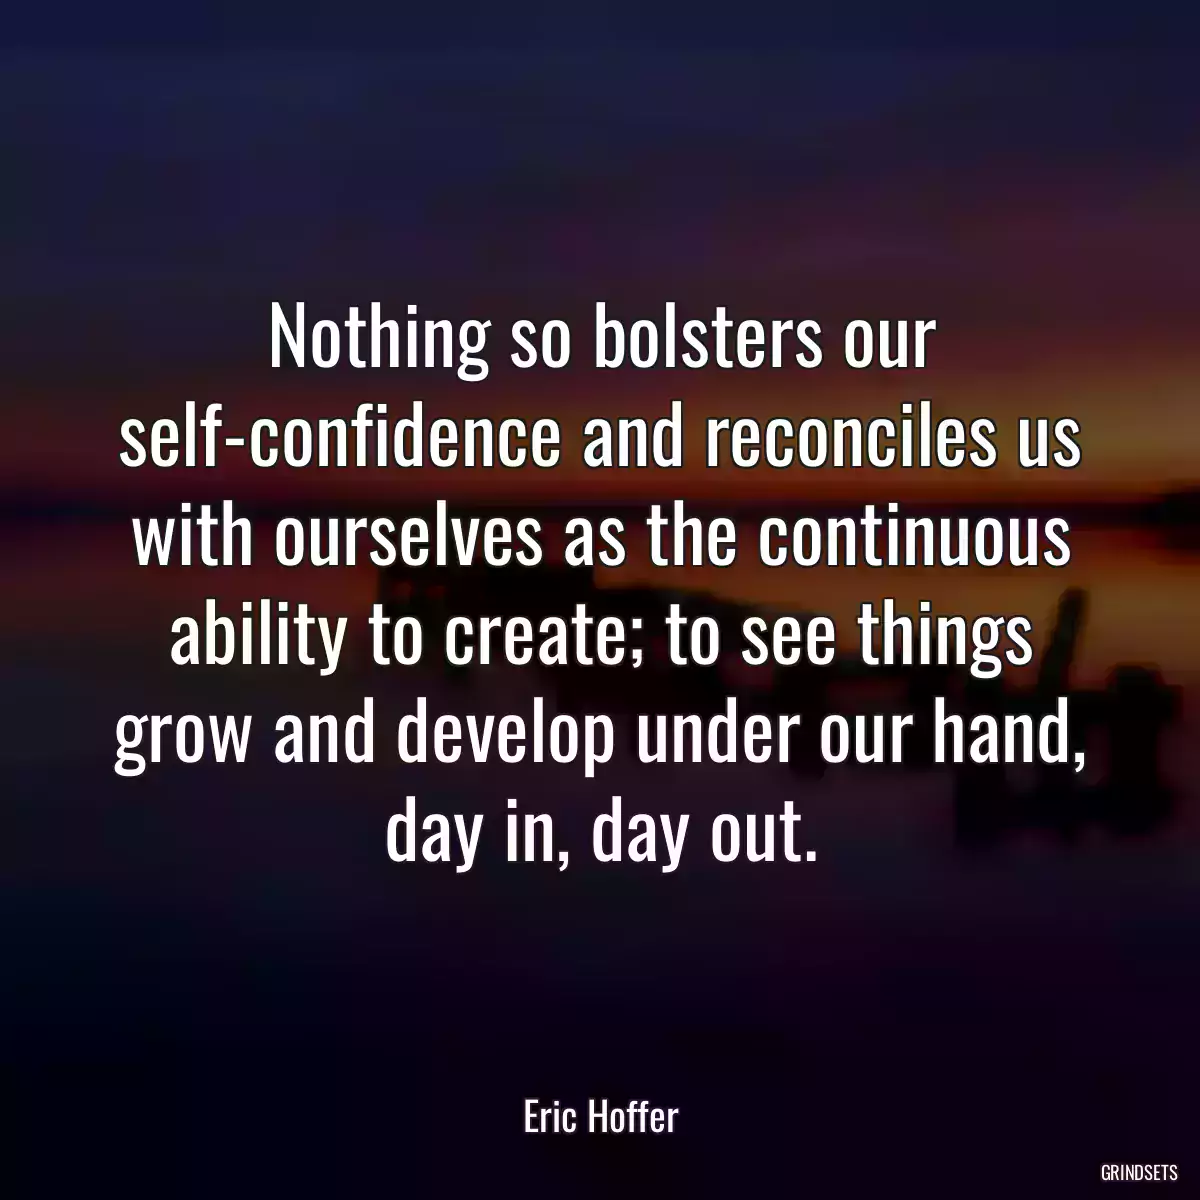 Nothing so bolsters our self-confidence and reconciles us with ourselves as the continuous ability to create; to see things grow and develop under our hand, day in, day out.